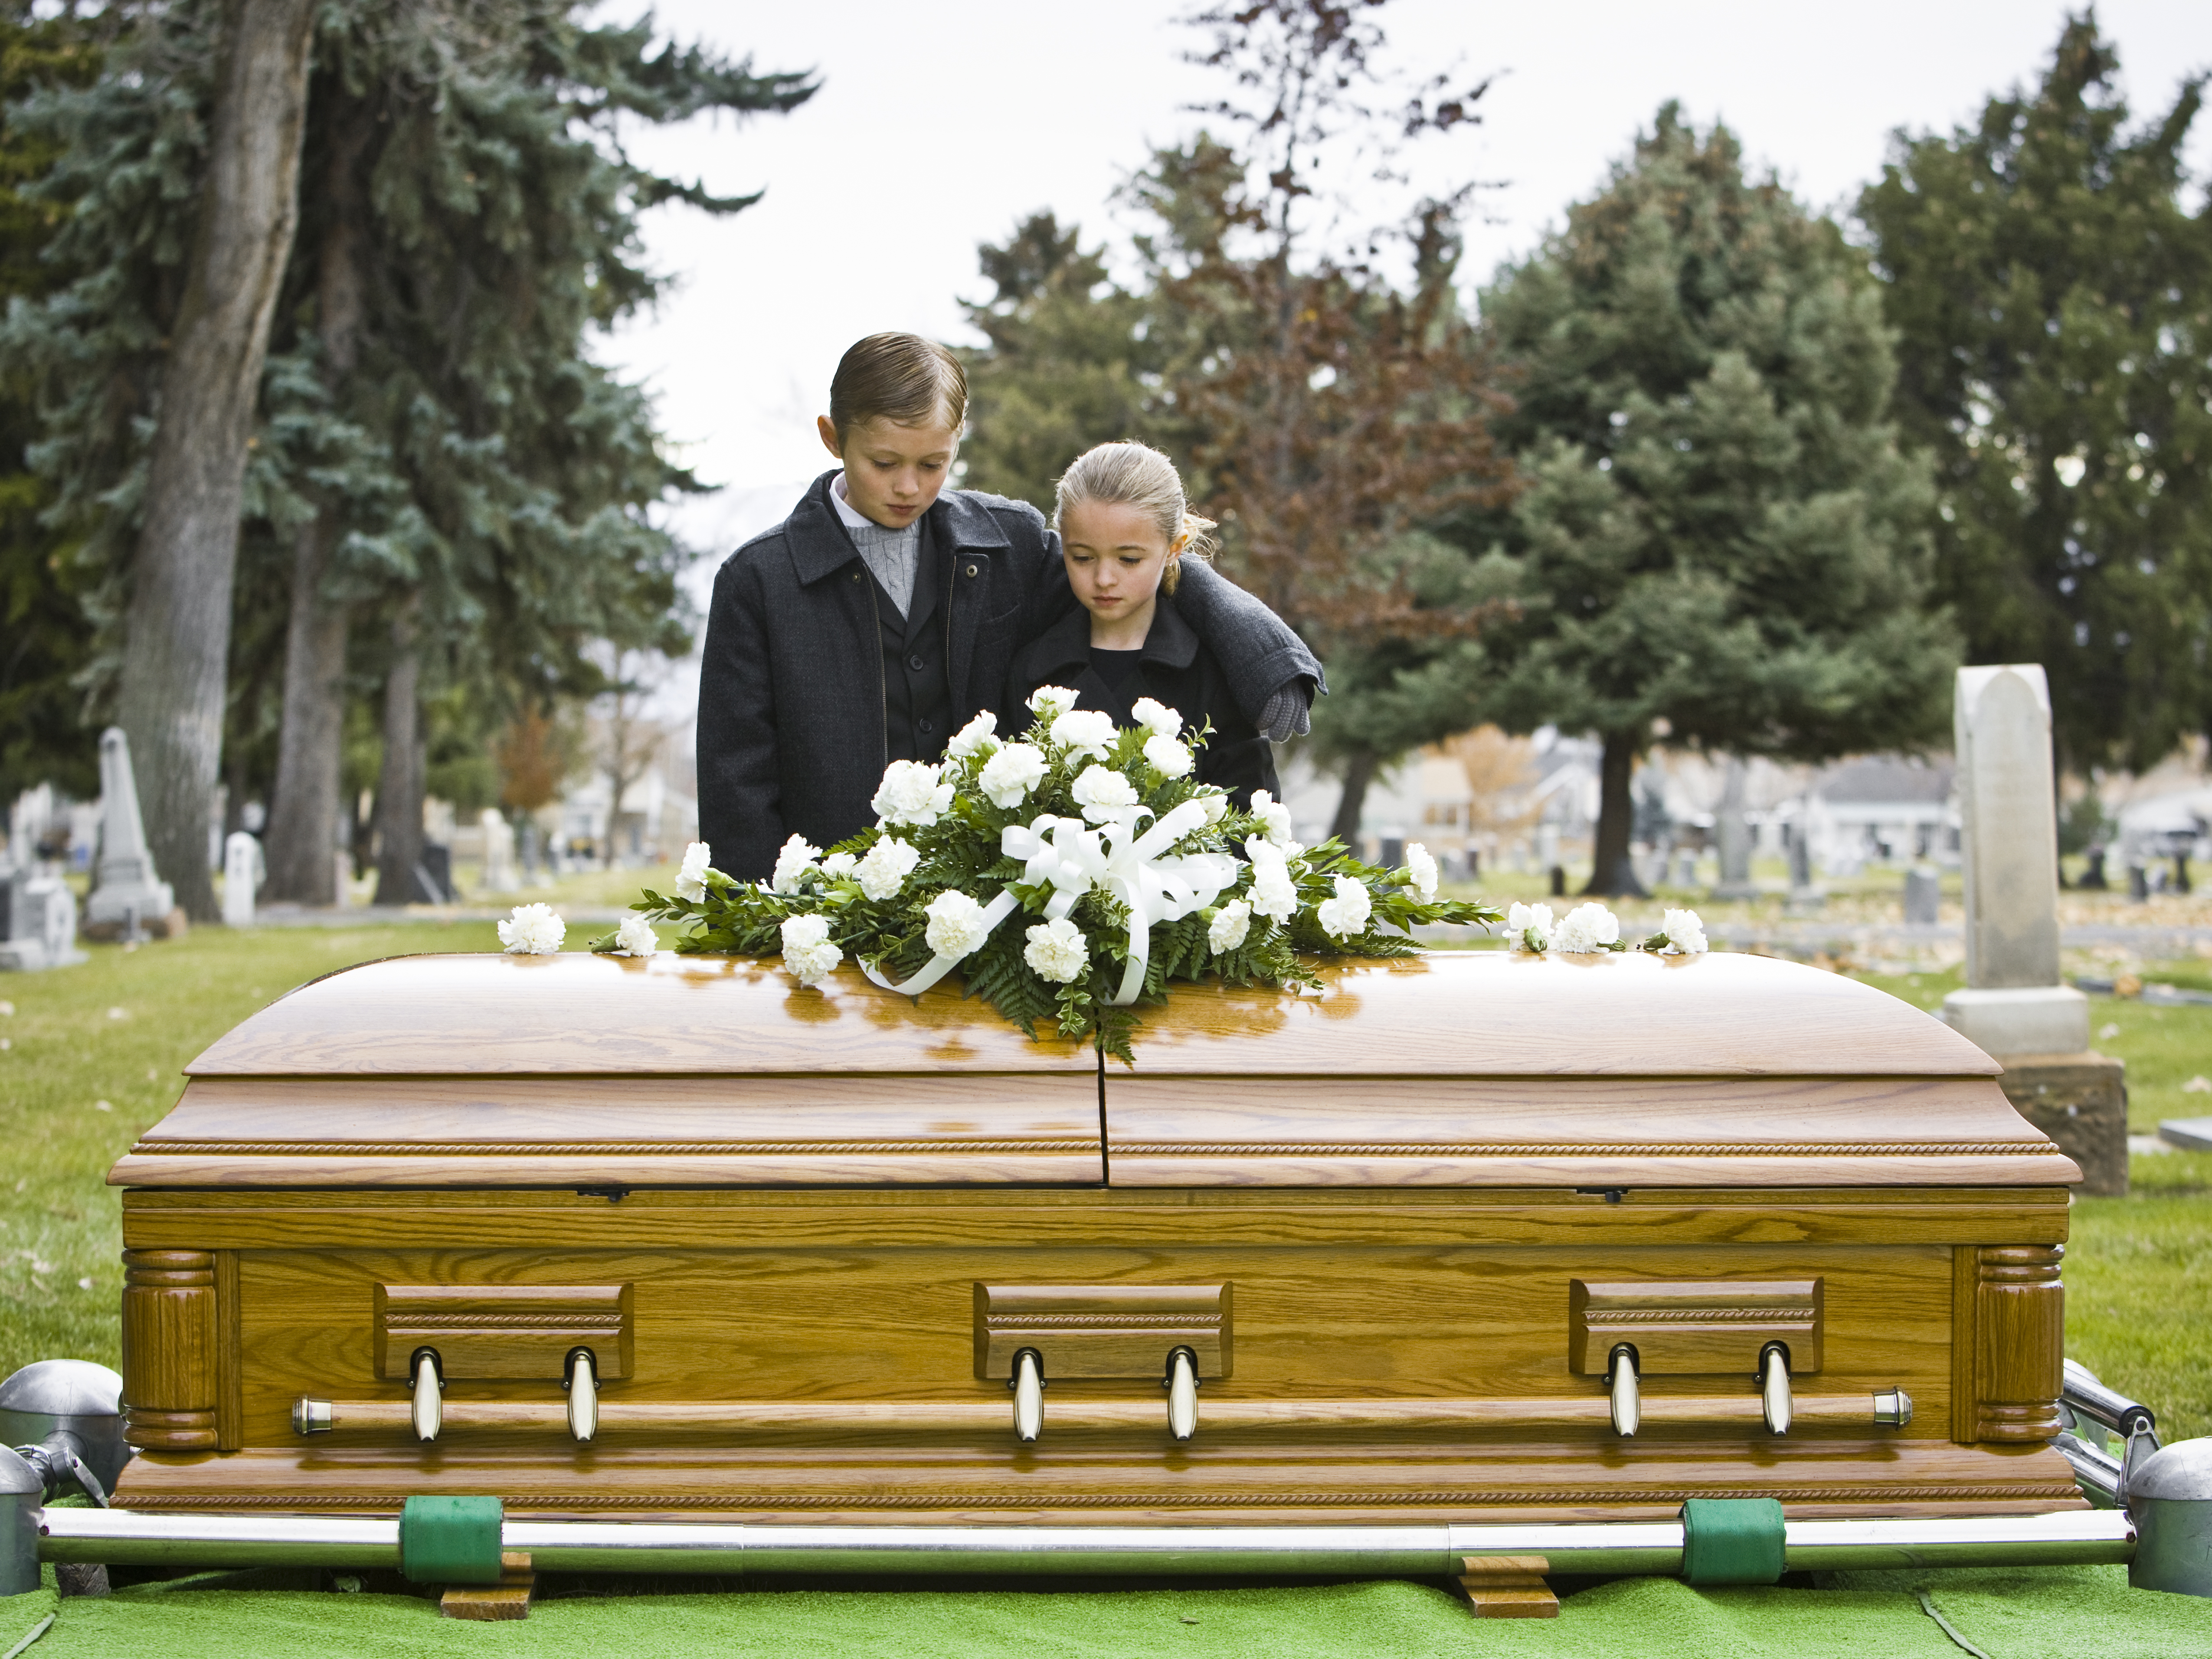 A brother and sister at a funeral | Source: Getty Images